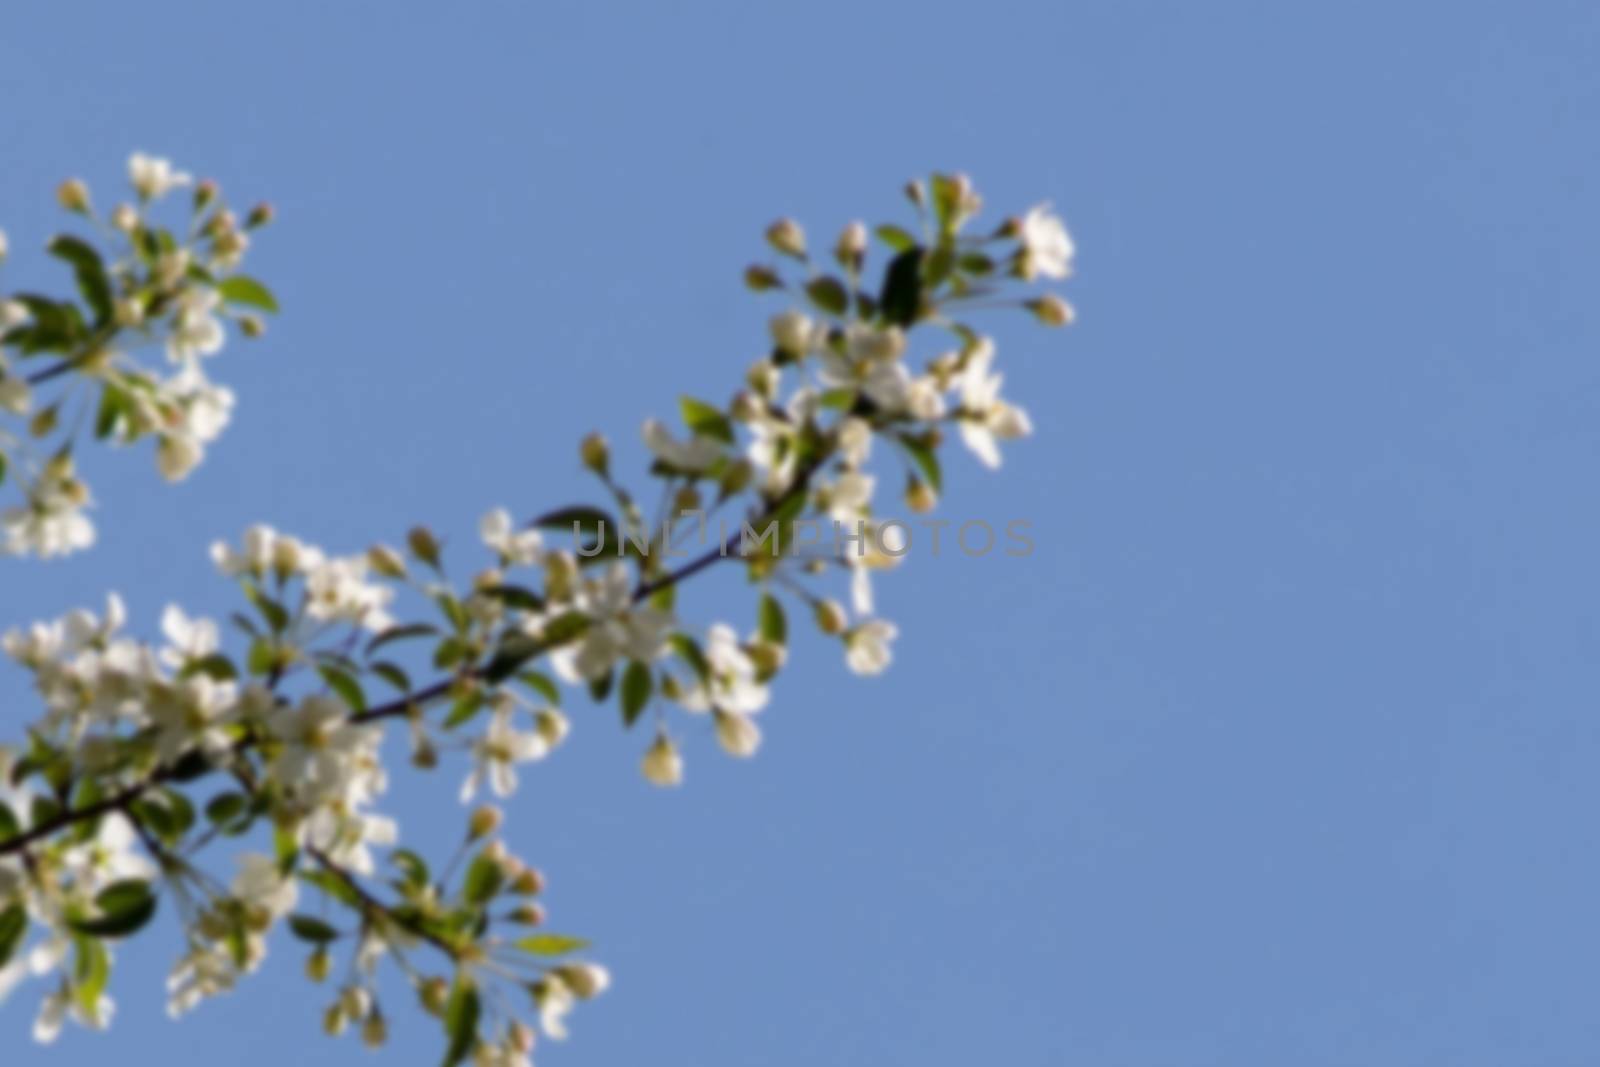 A blurry Background of Apple branches with white flowers against a blue sky on a spring day.